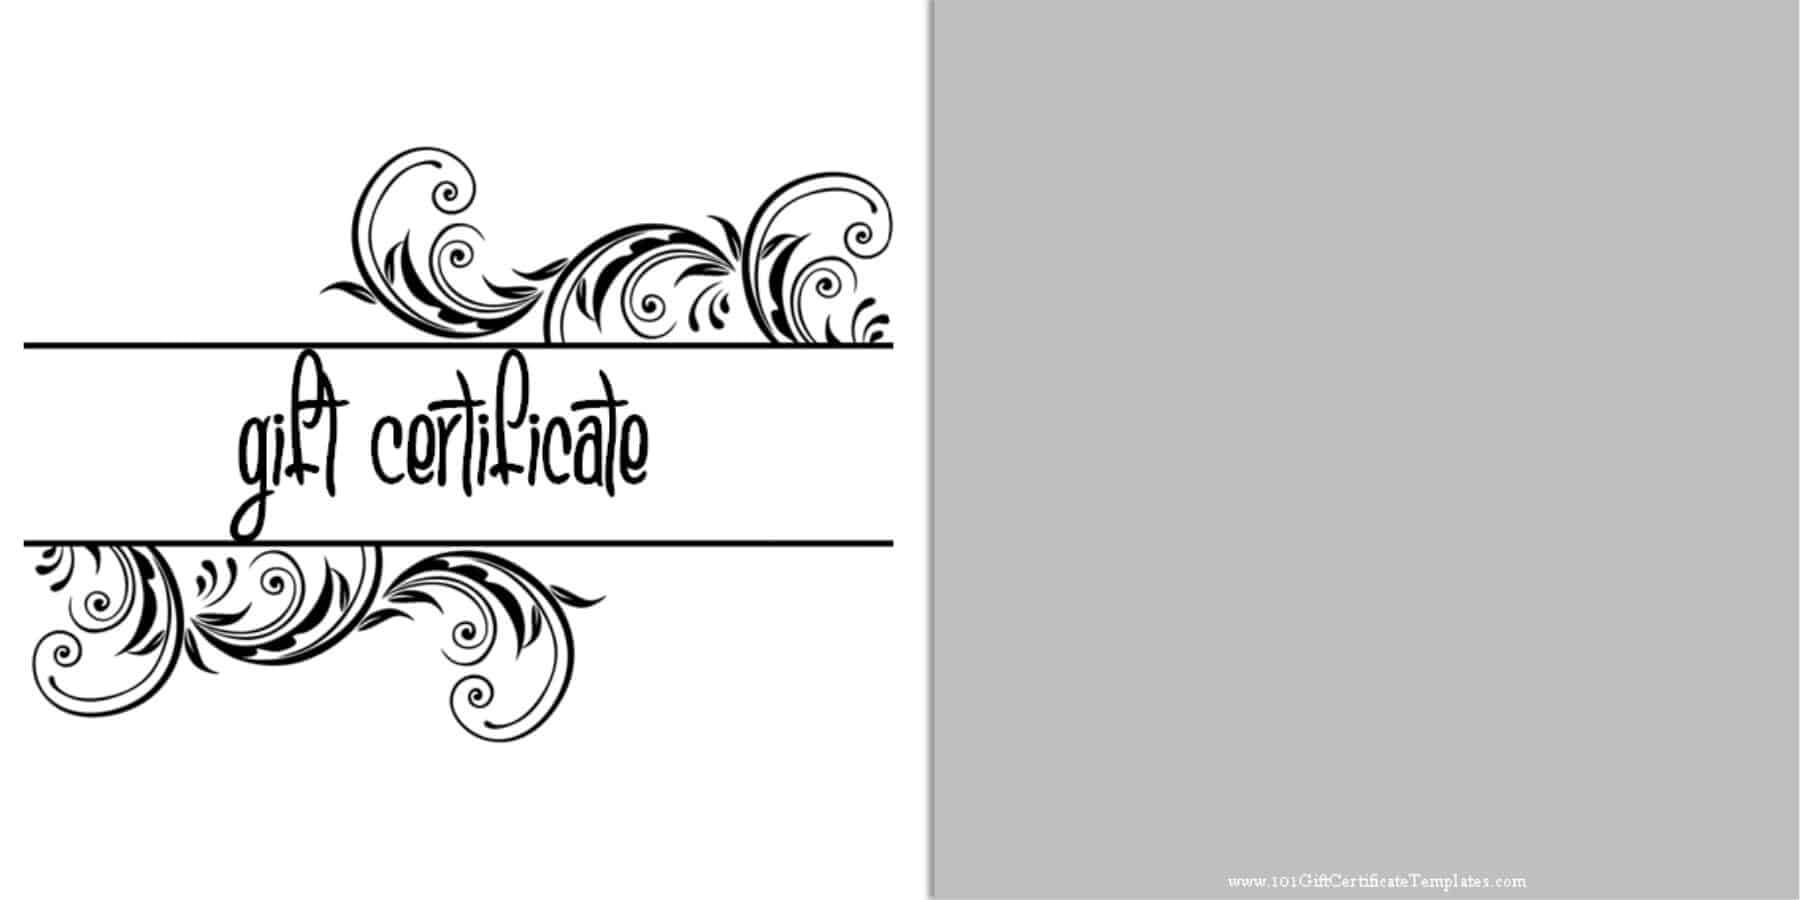 Printable Gift Certificate Templates Throughout Black And White Gift Certificate Template Free